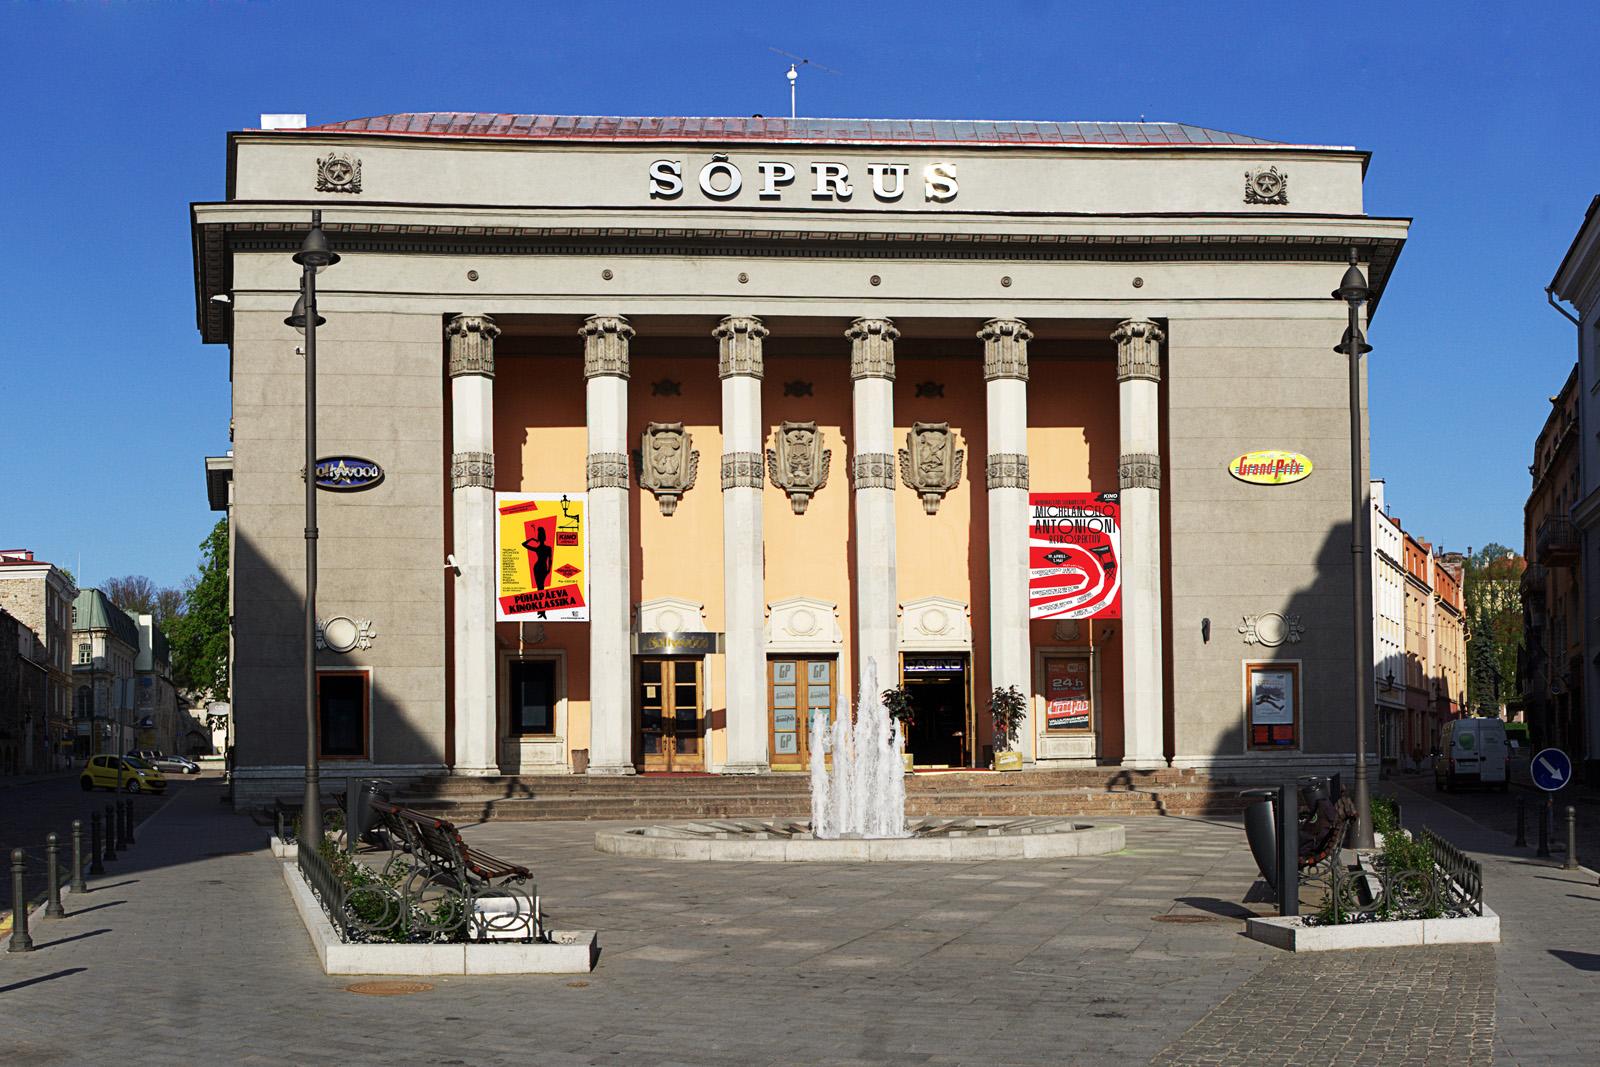 Cover image of this place "Sõprus" Cinema